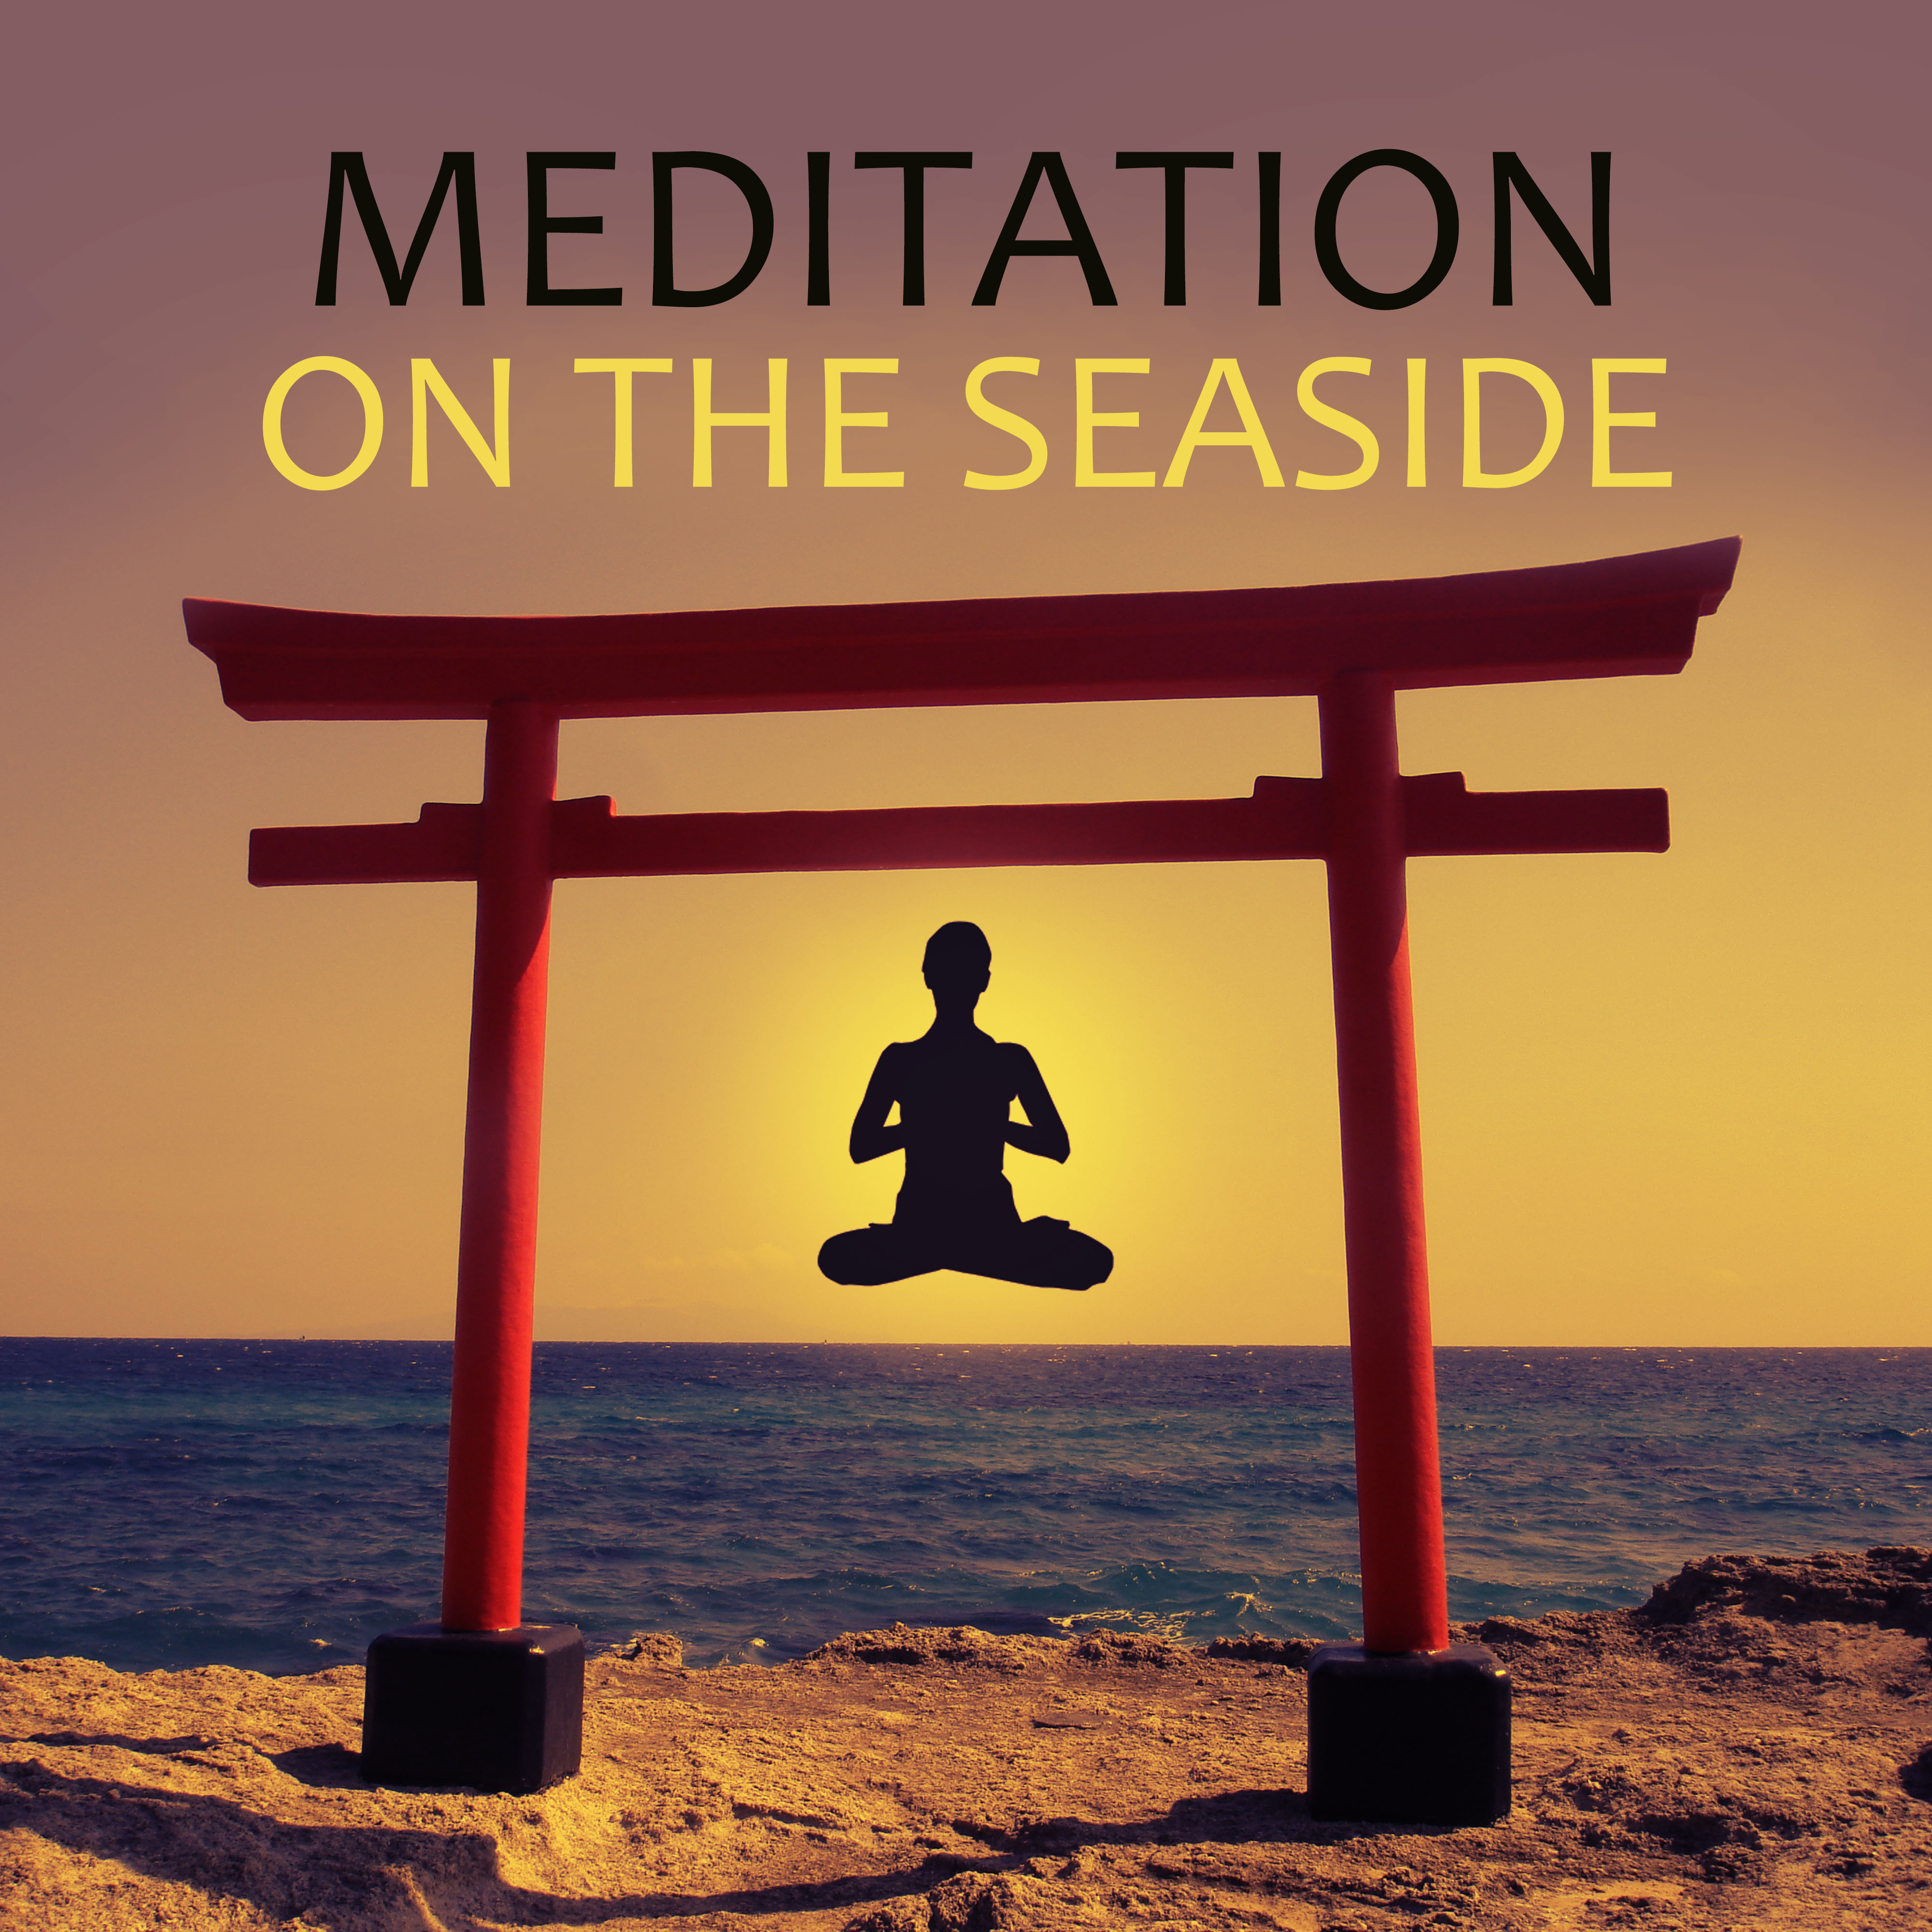 Meditation on the Seaside  Full of Peace Music for Reiki, Yoga Positions and Breathing Exercises,  Natural Sounds of Water for Pilates and Wellness, Relax Your Body Mind and Soul